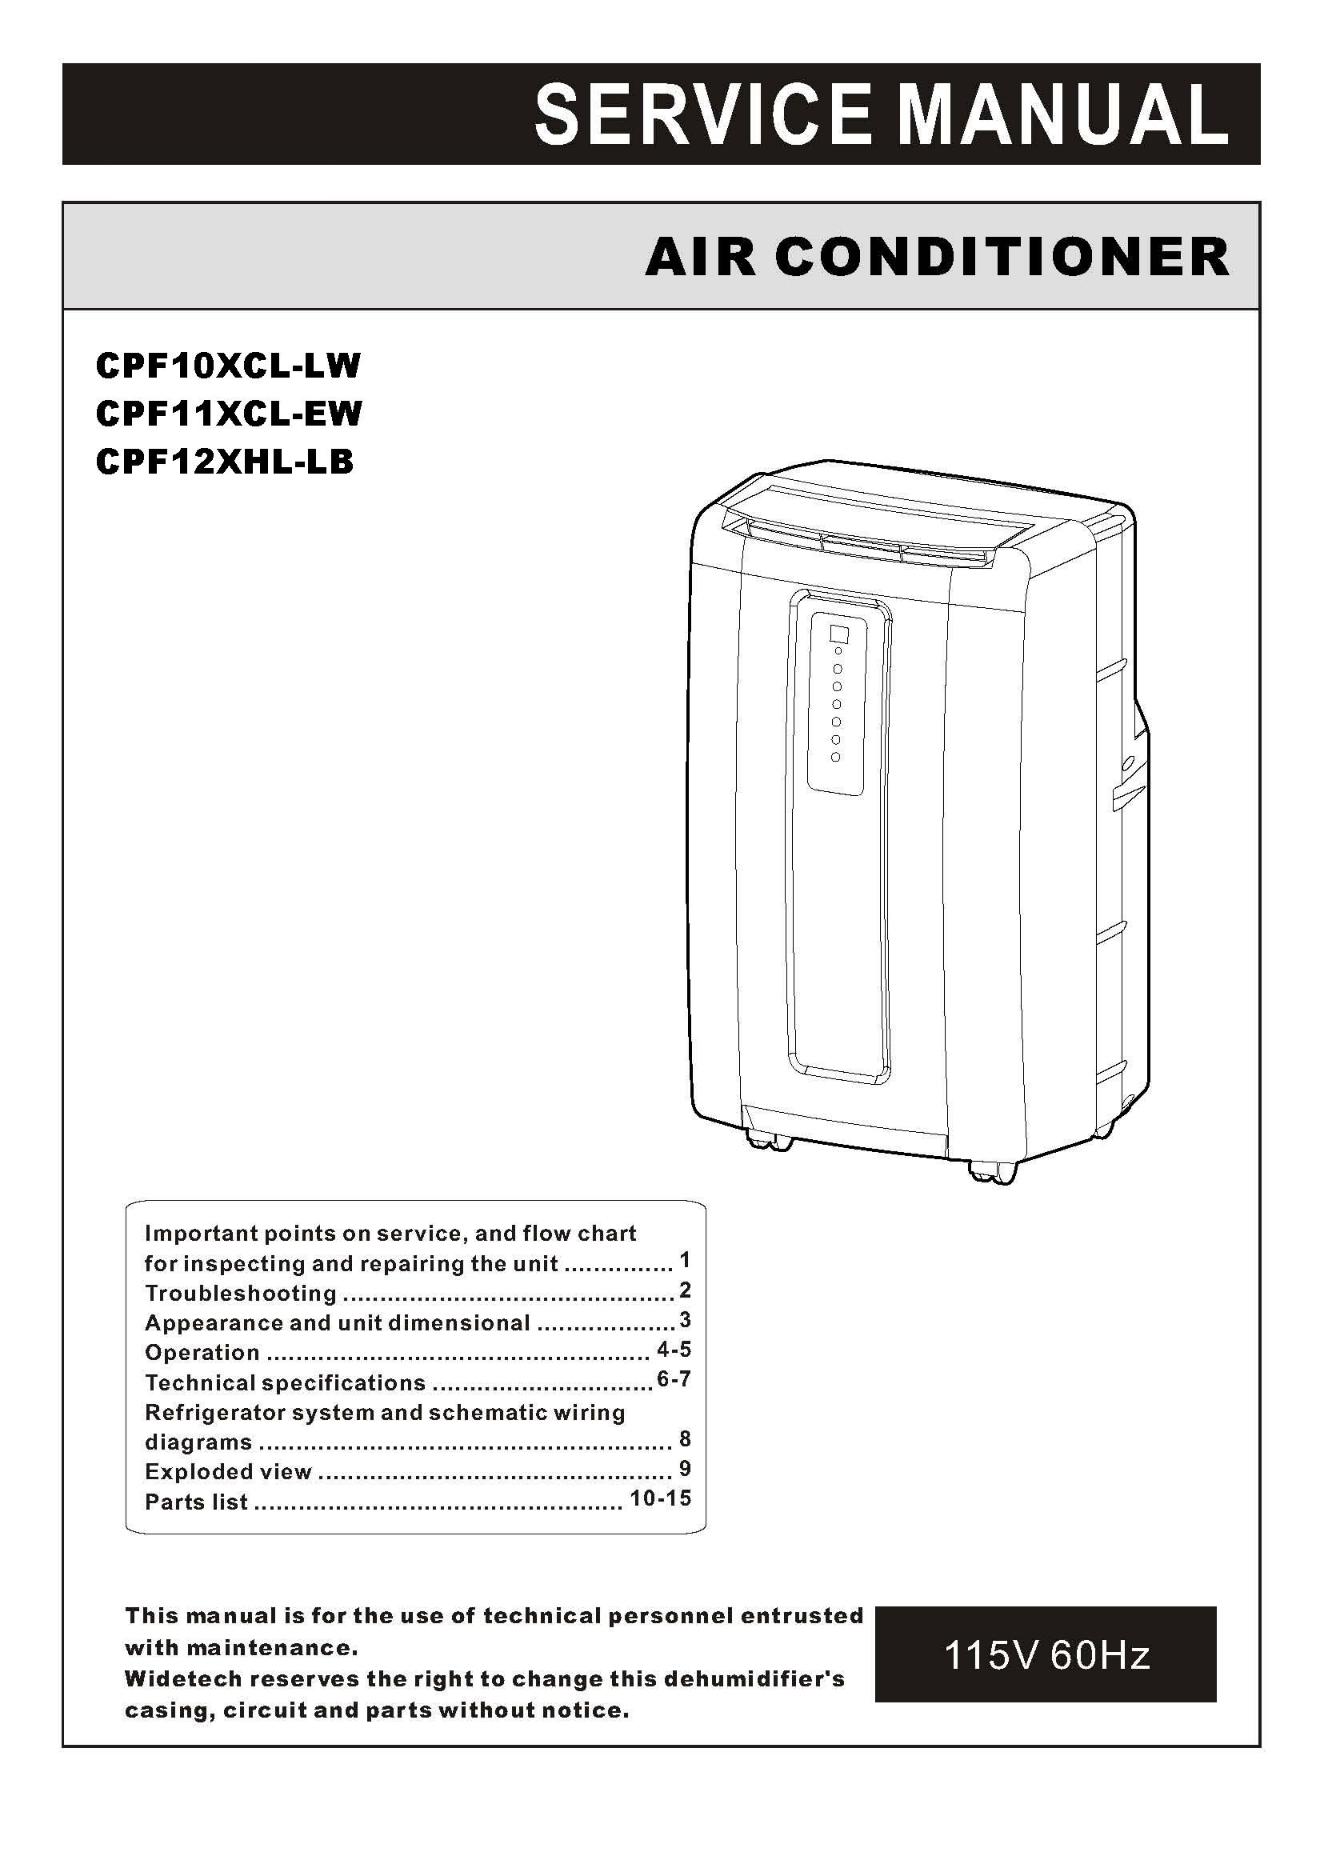 Haier Cpf11xcl-ew, Cpf10xcl-lw Owner's Manual